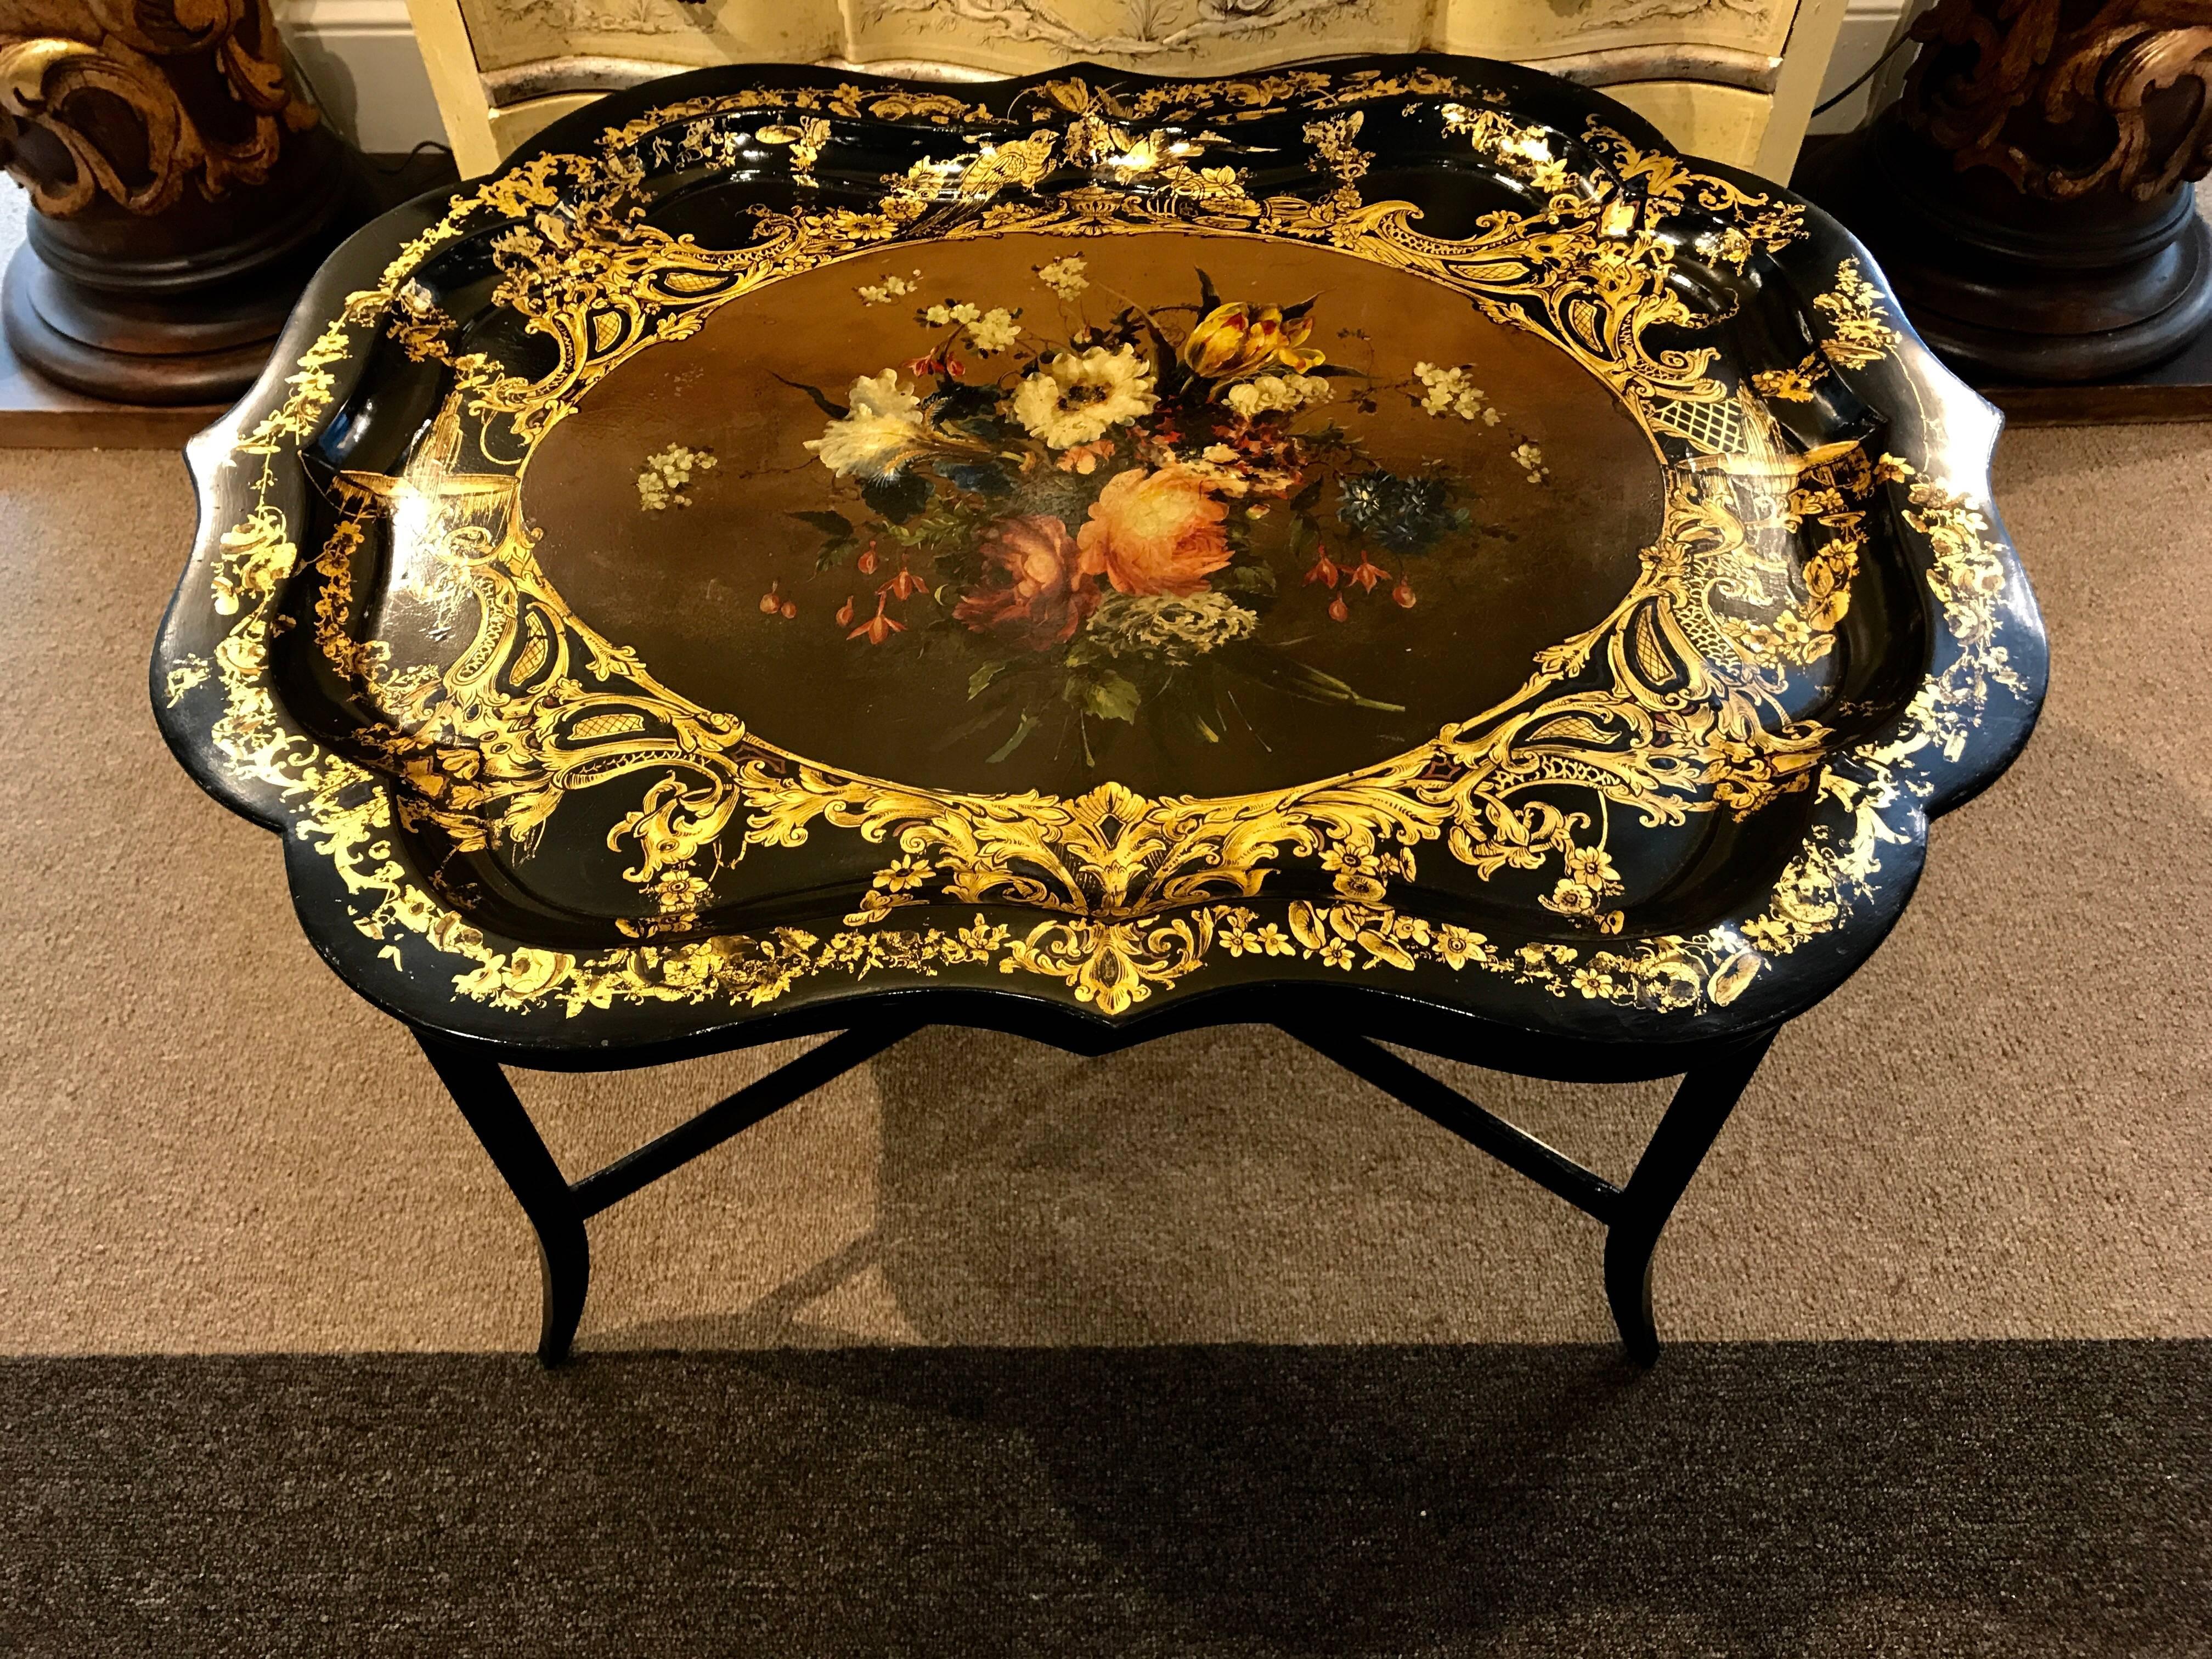 Stunning 19th century English papier mâché gilt floral tray, now as a table. Crisp all-over decoration, the scalloped tray with the gilt surround with foliate and fountain motif. The centre a vibrant large bouquet of yellow and rose-colored flowers.